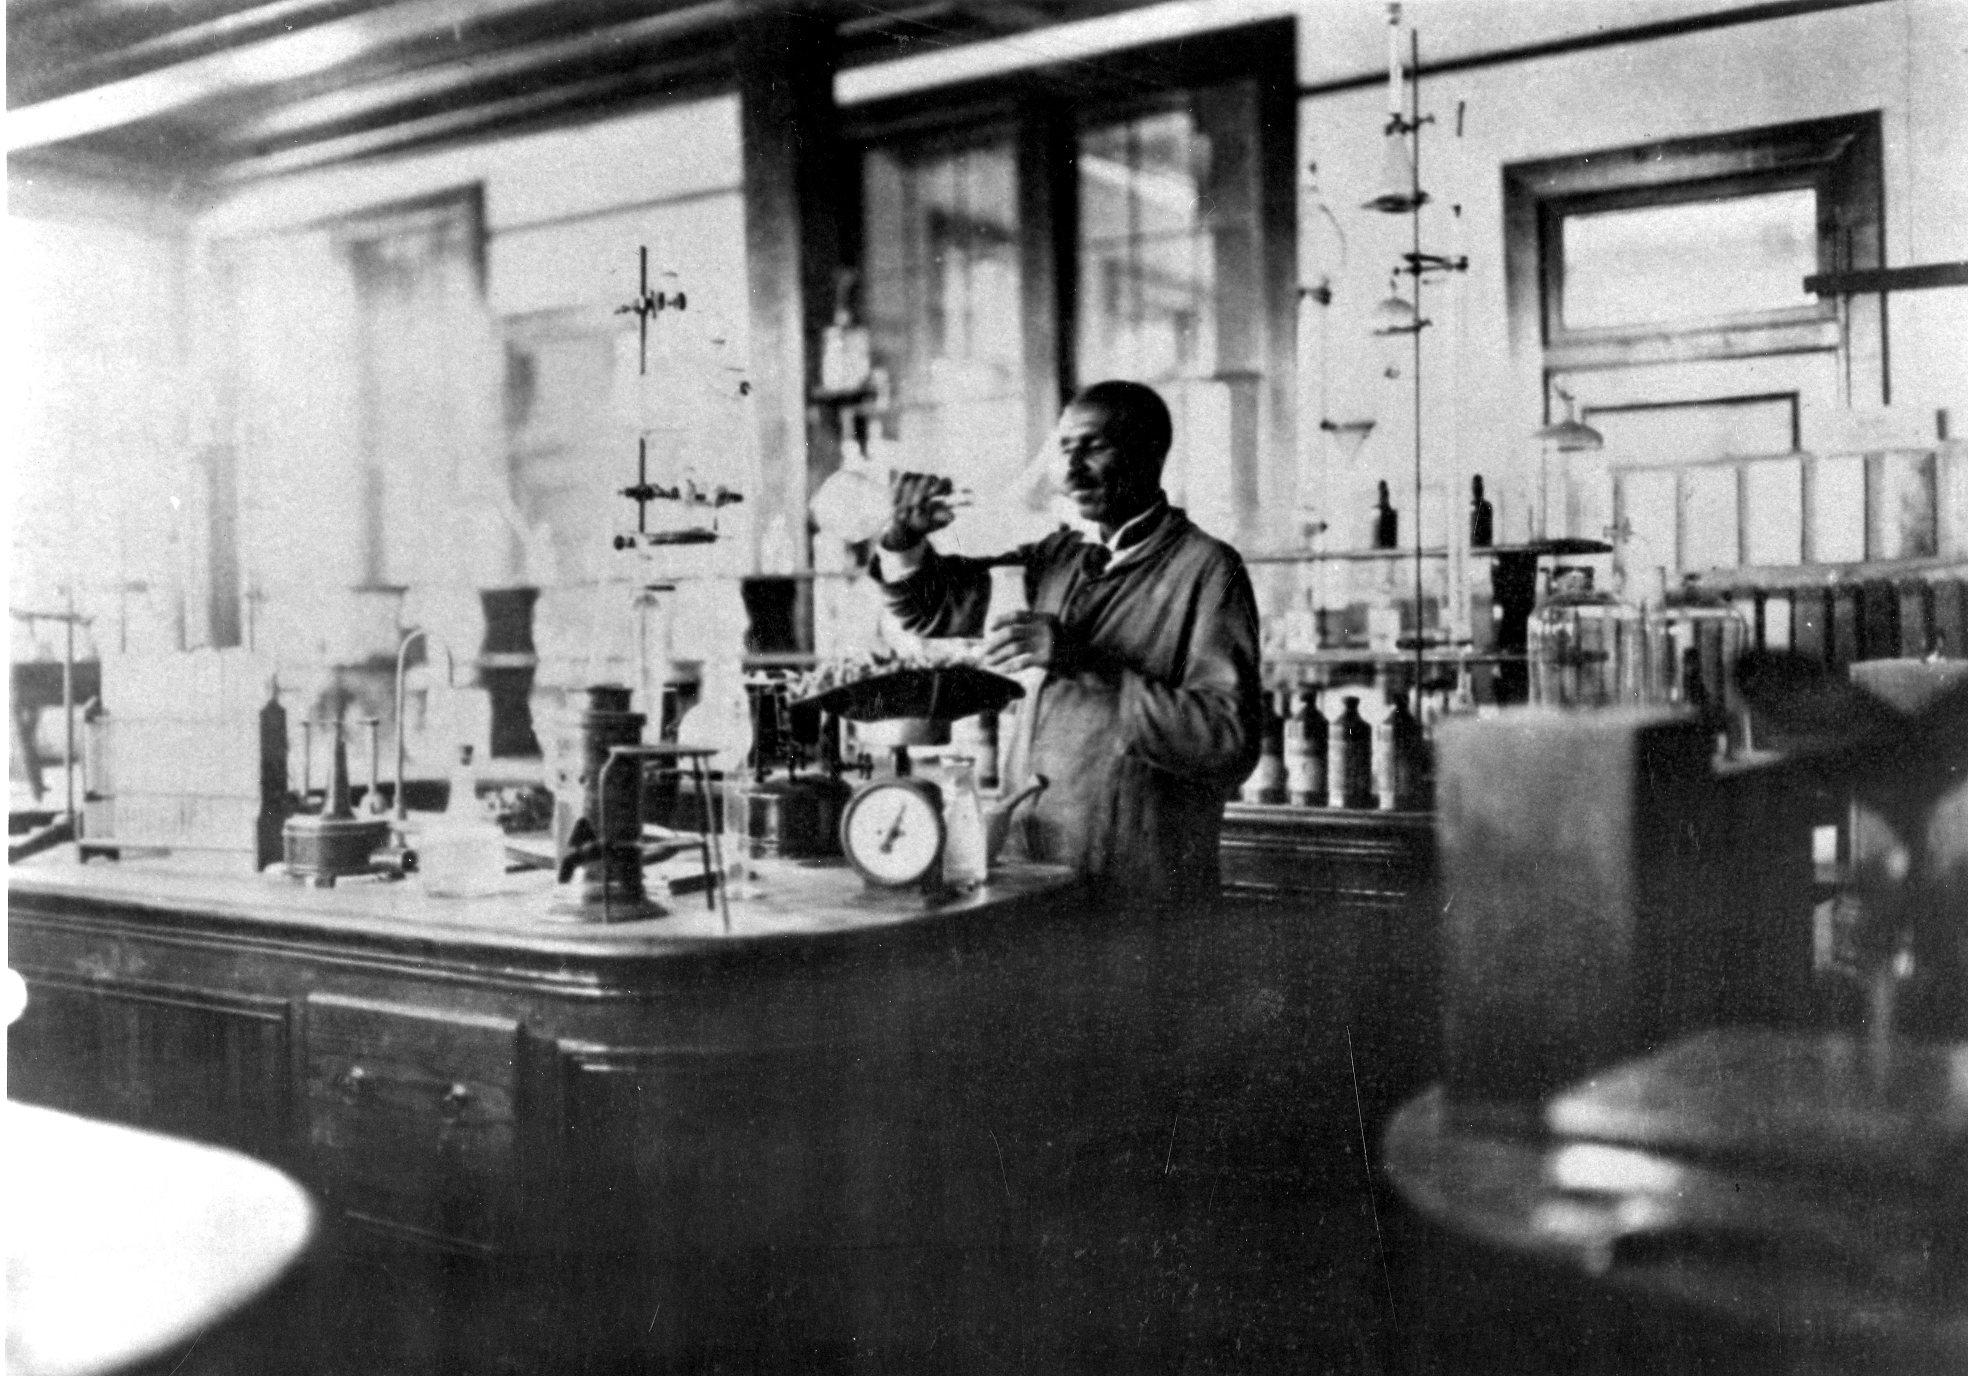 George Washington Carver at work in his laboratory